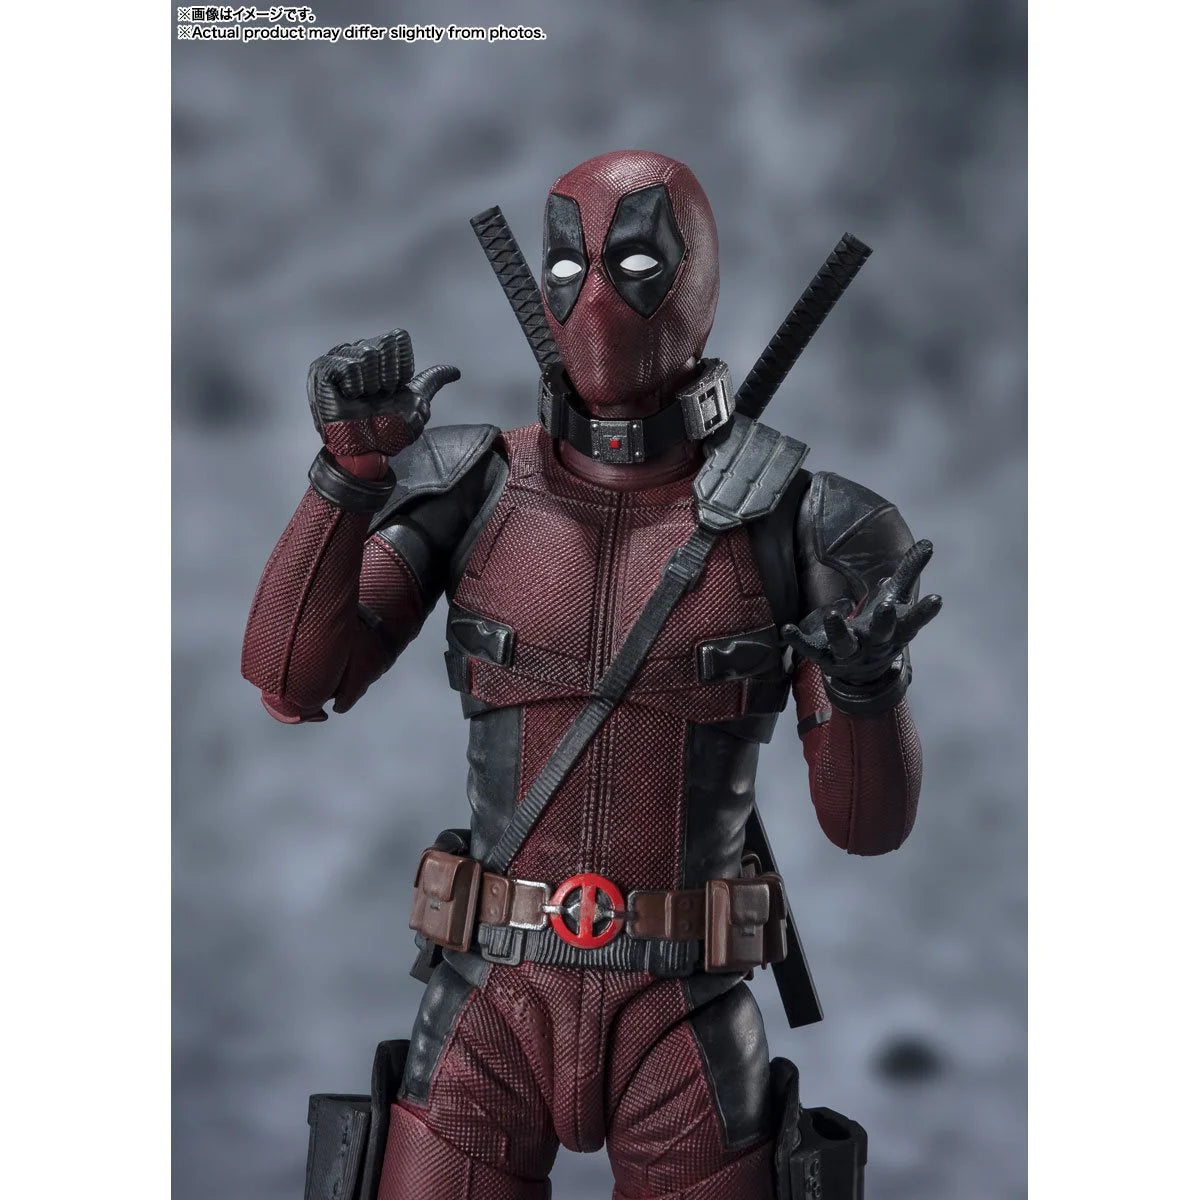 Deadpool Collectible Figure by Tamashii Nations